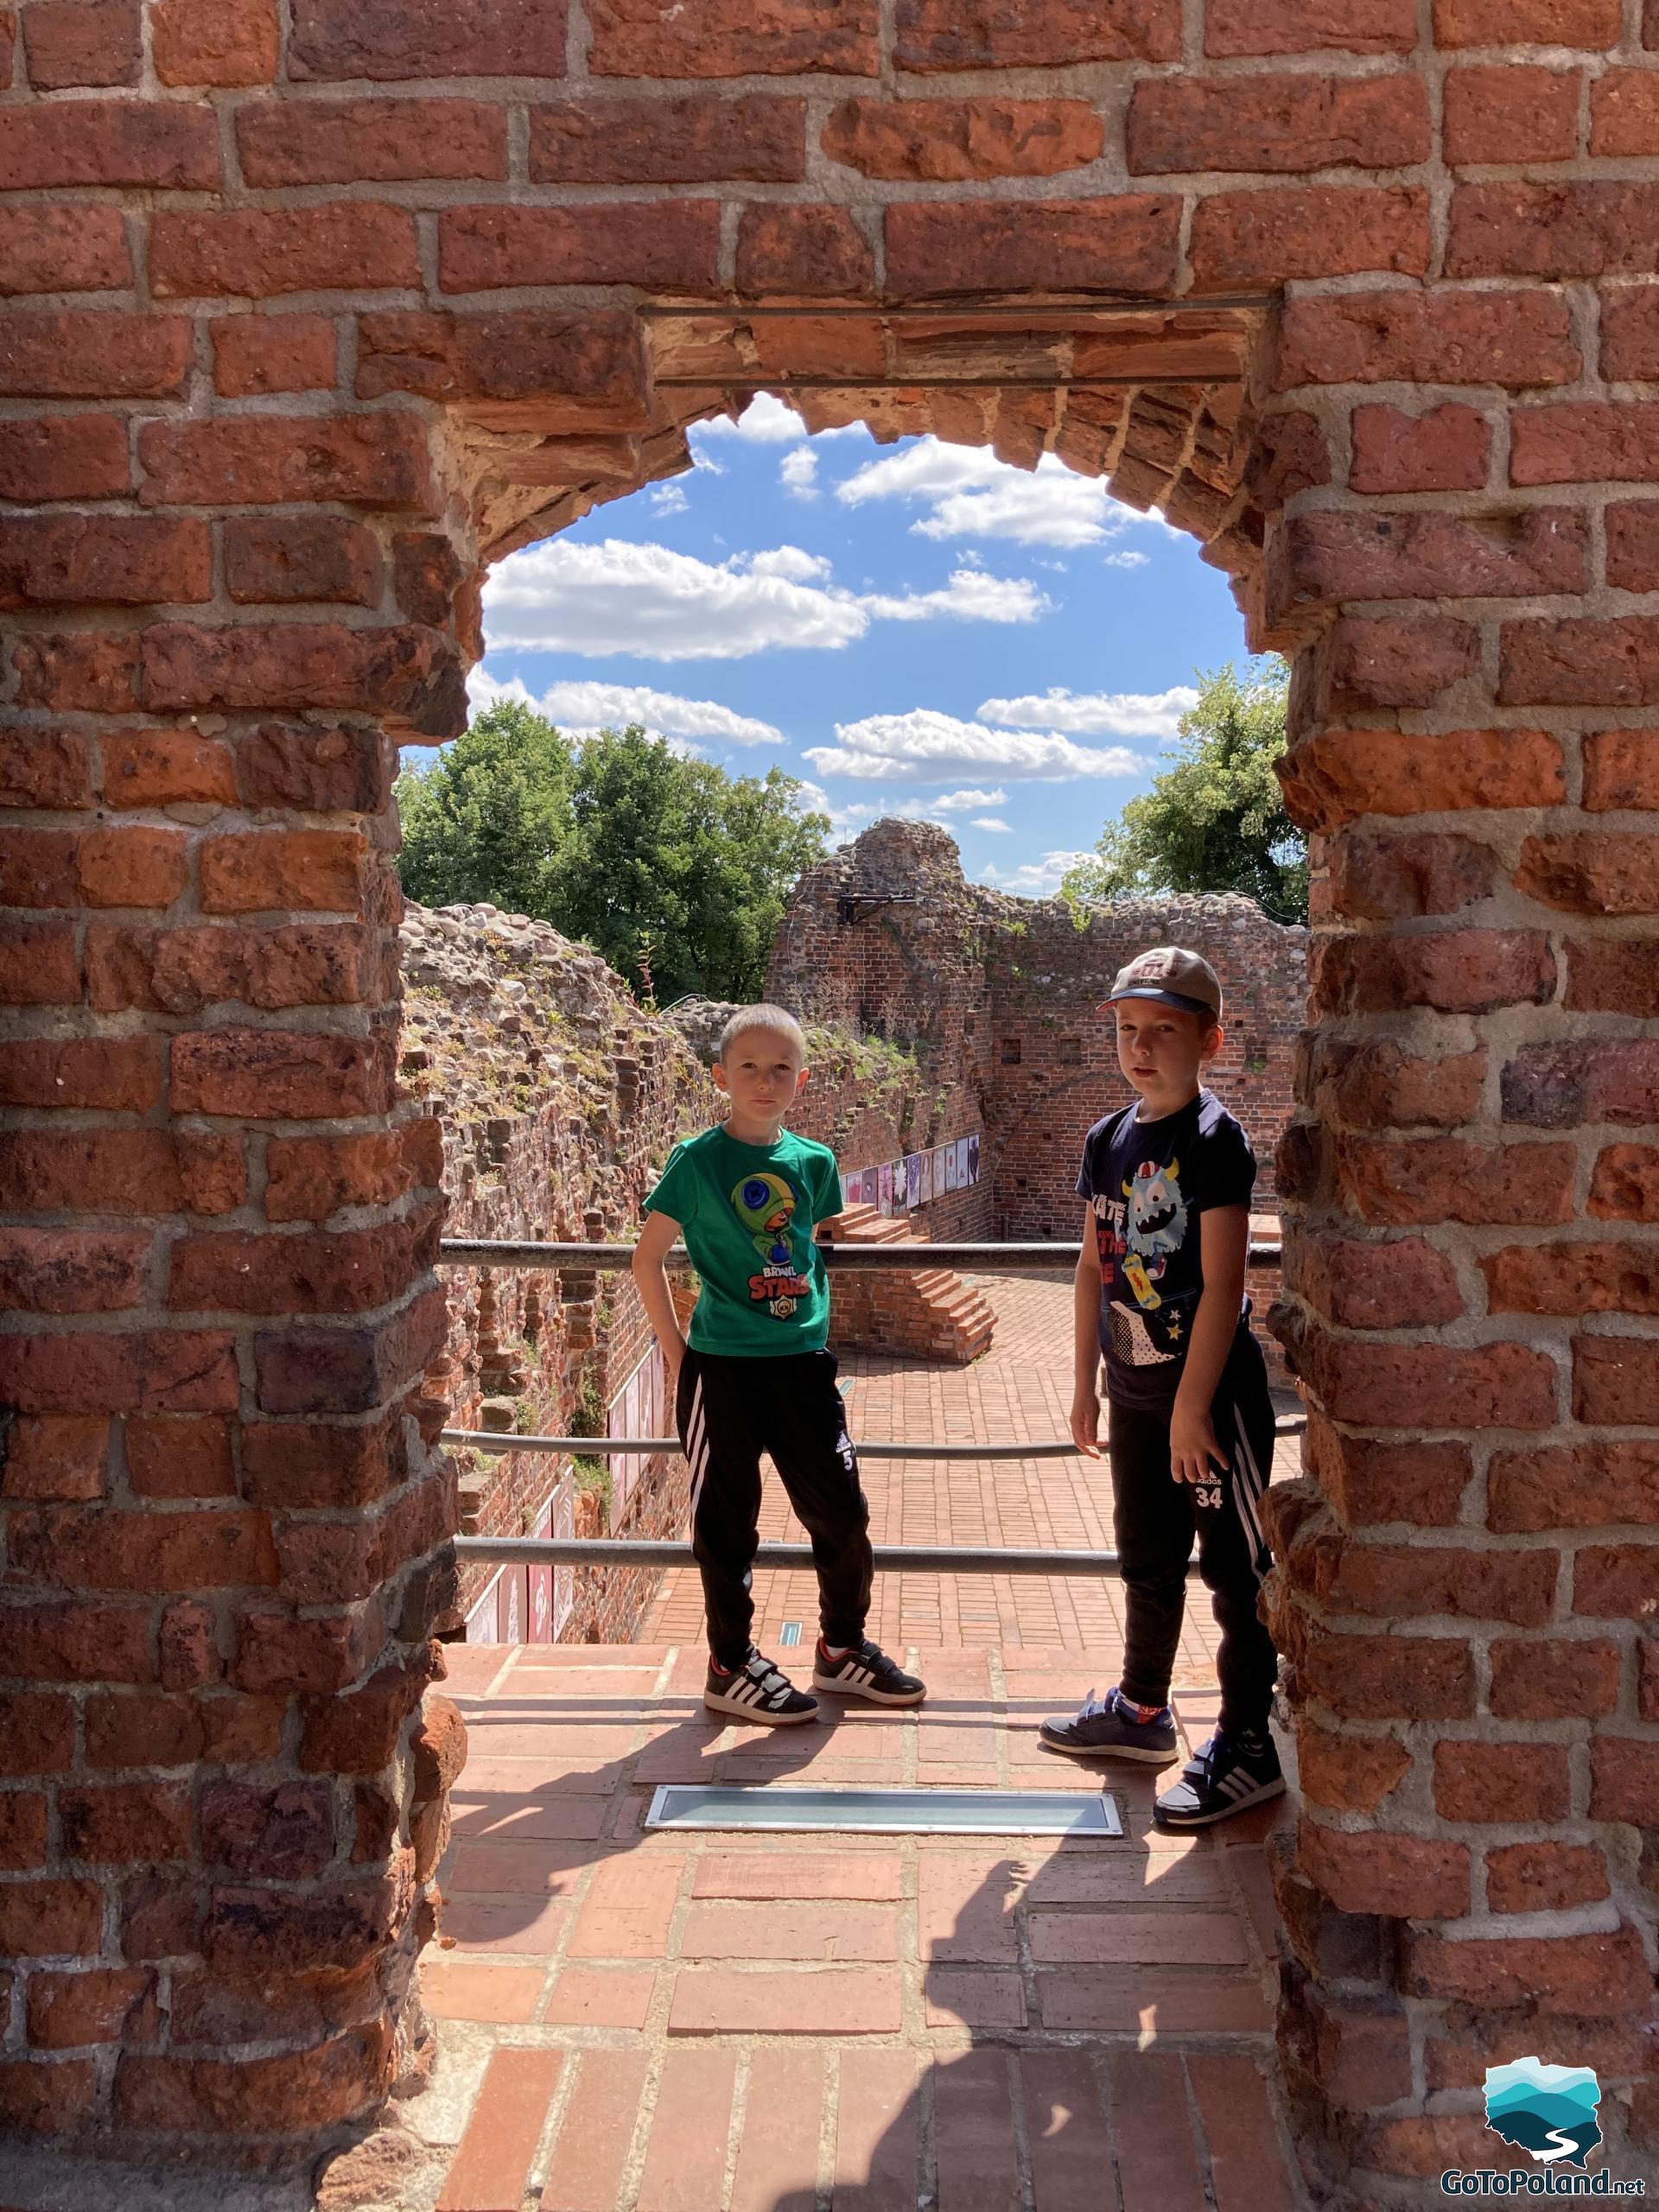 two children are standing in the entrance to the ruins of a former red brick castle